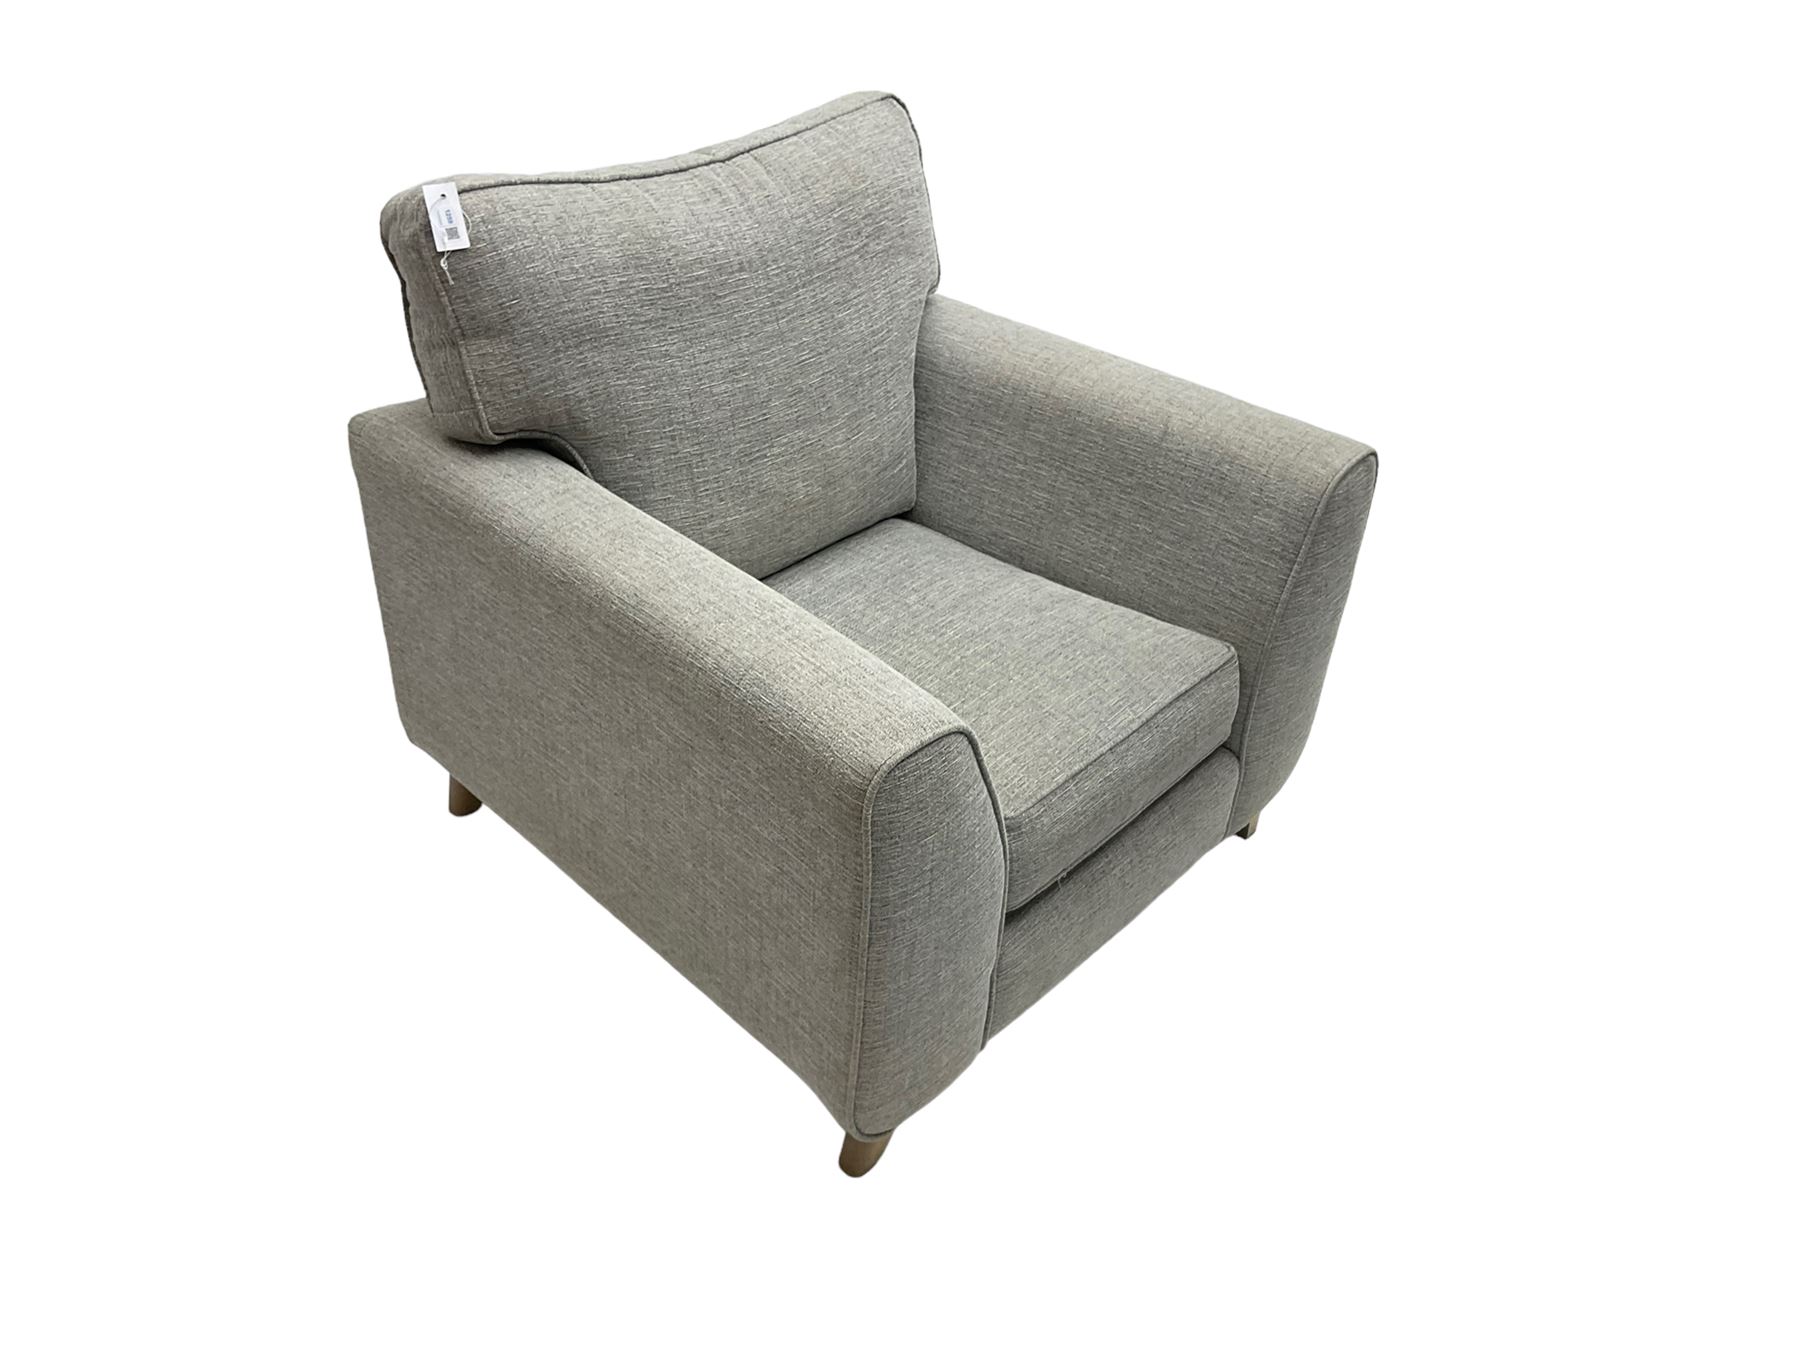 Armchair upholstered in graphite grey fabric - Image 4 of 7